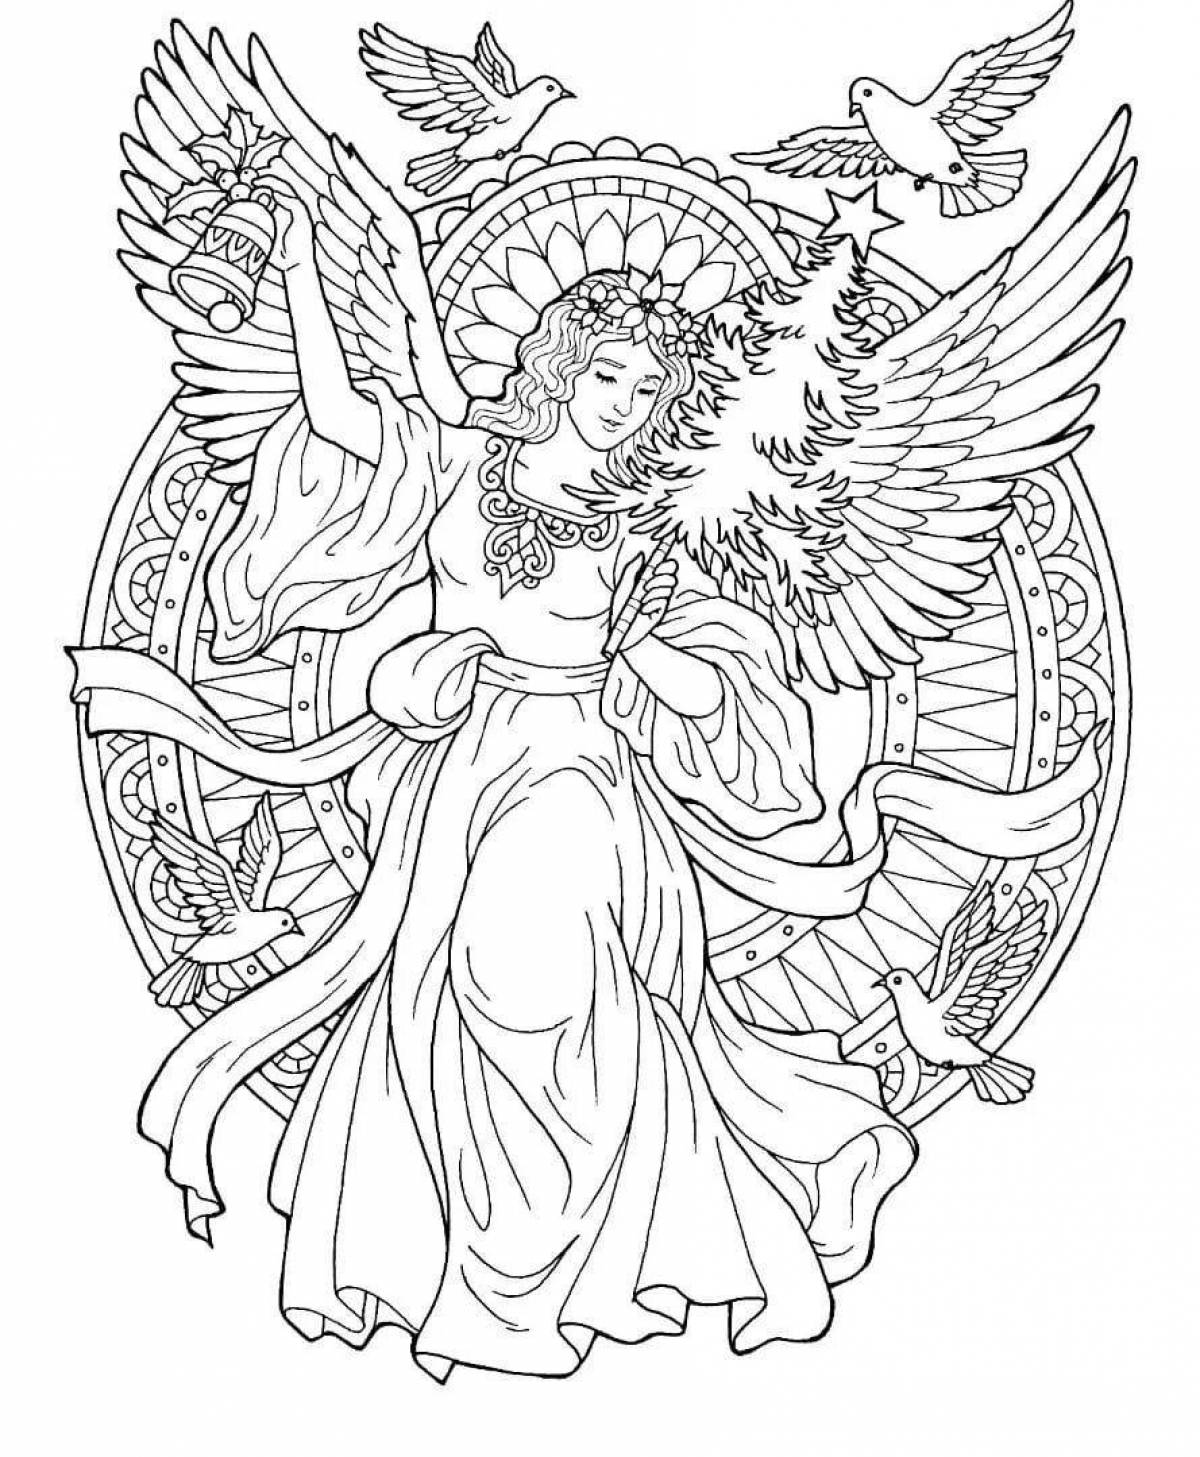 Gorgeous coloring book angels with beautiful wings